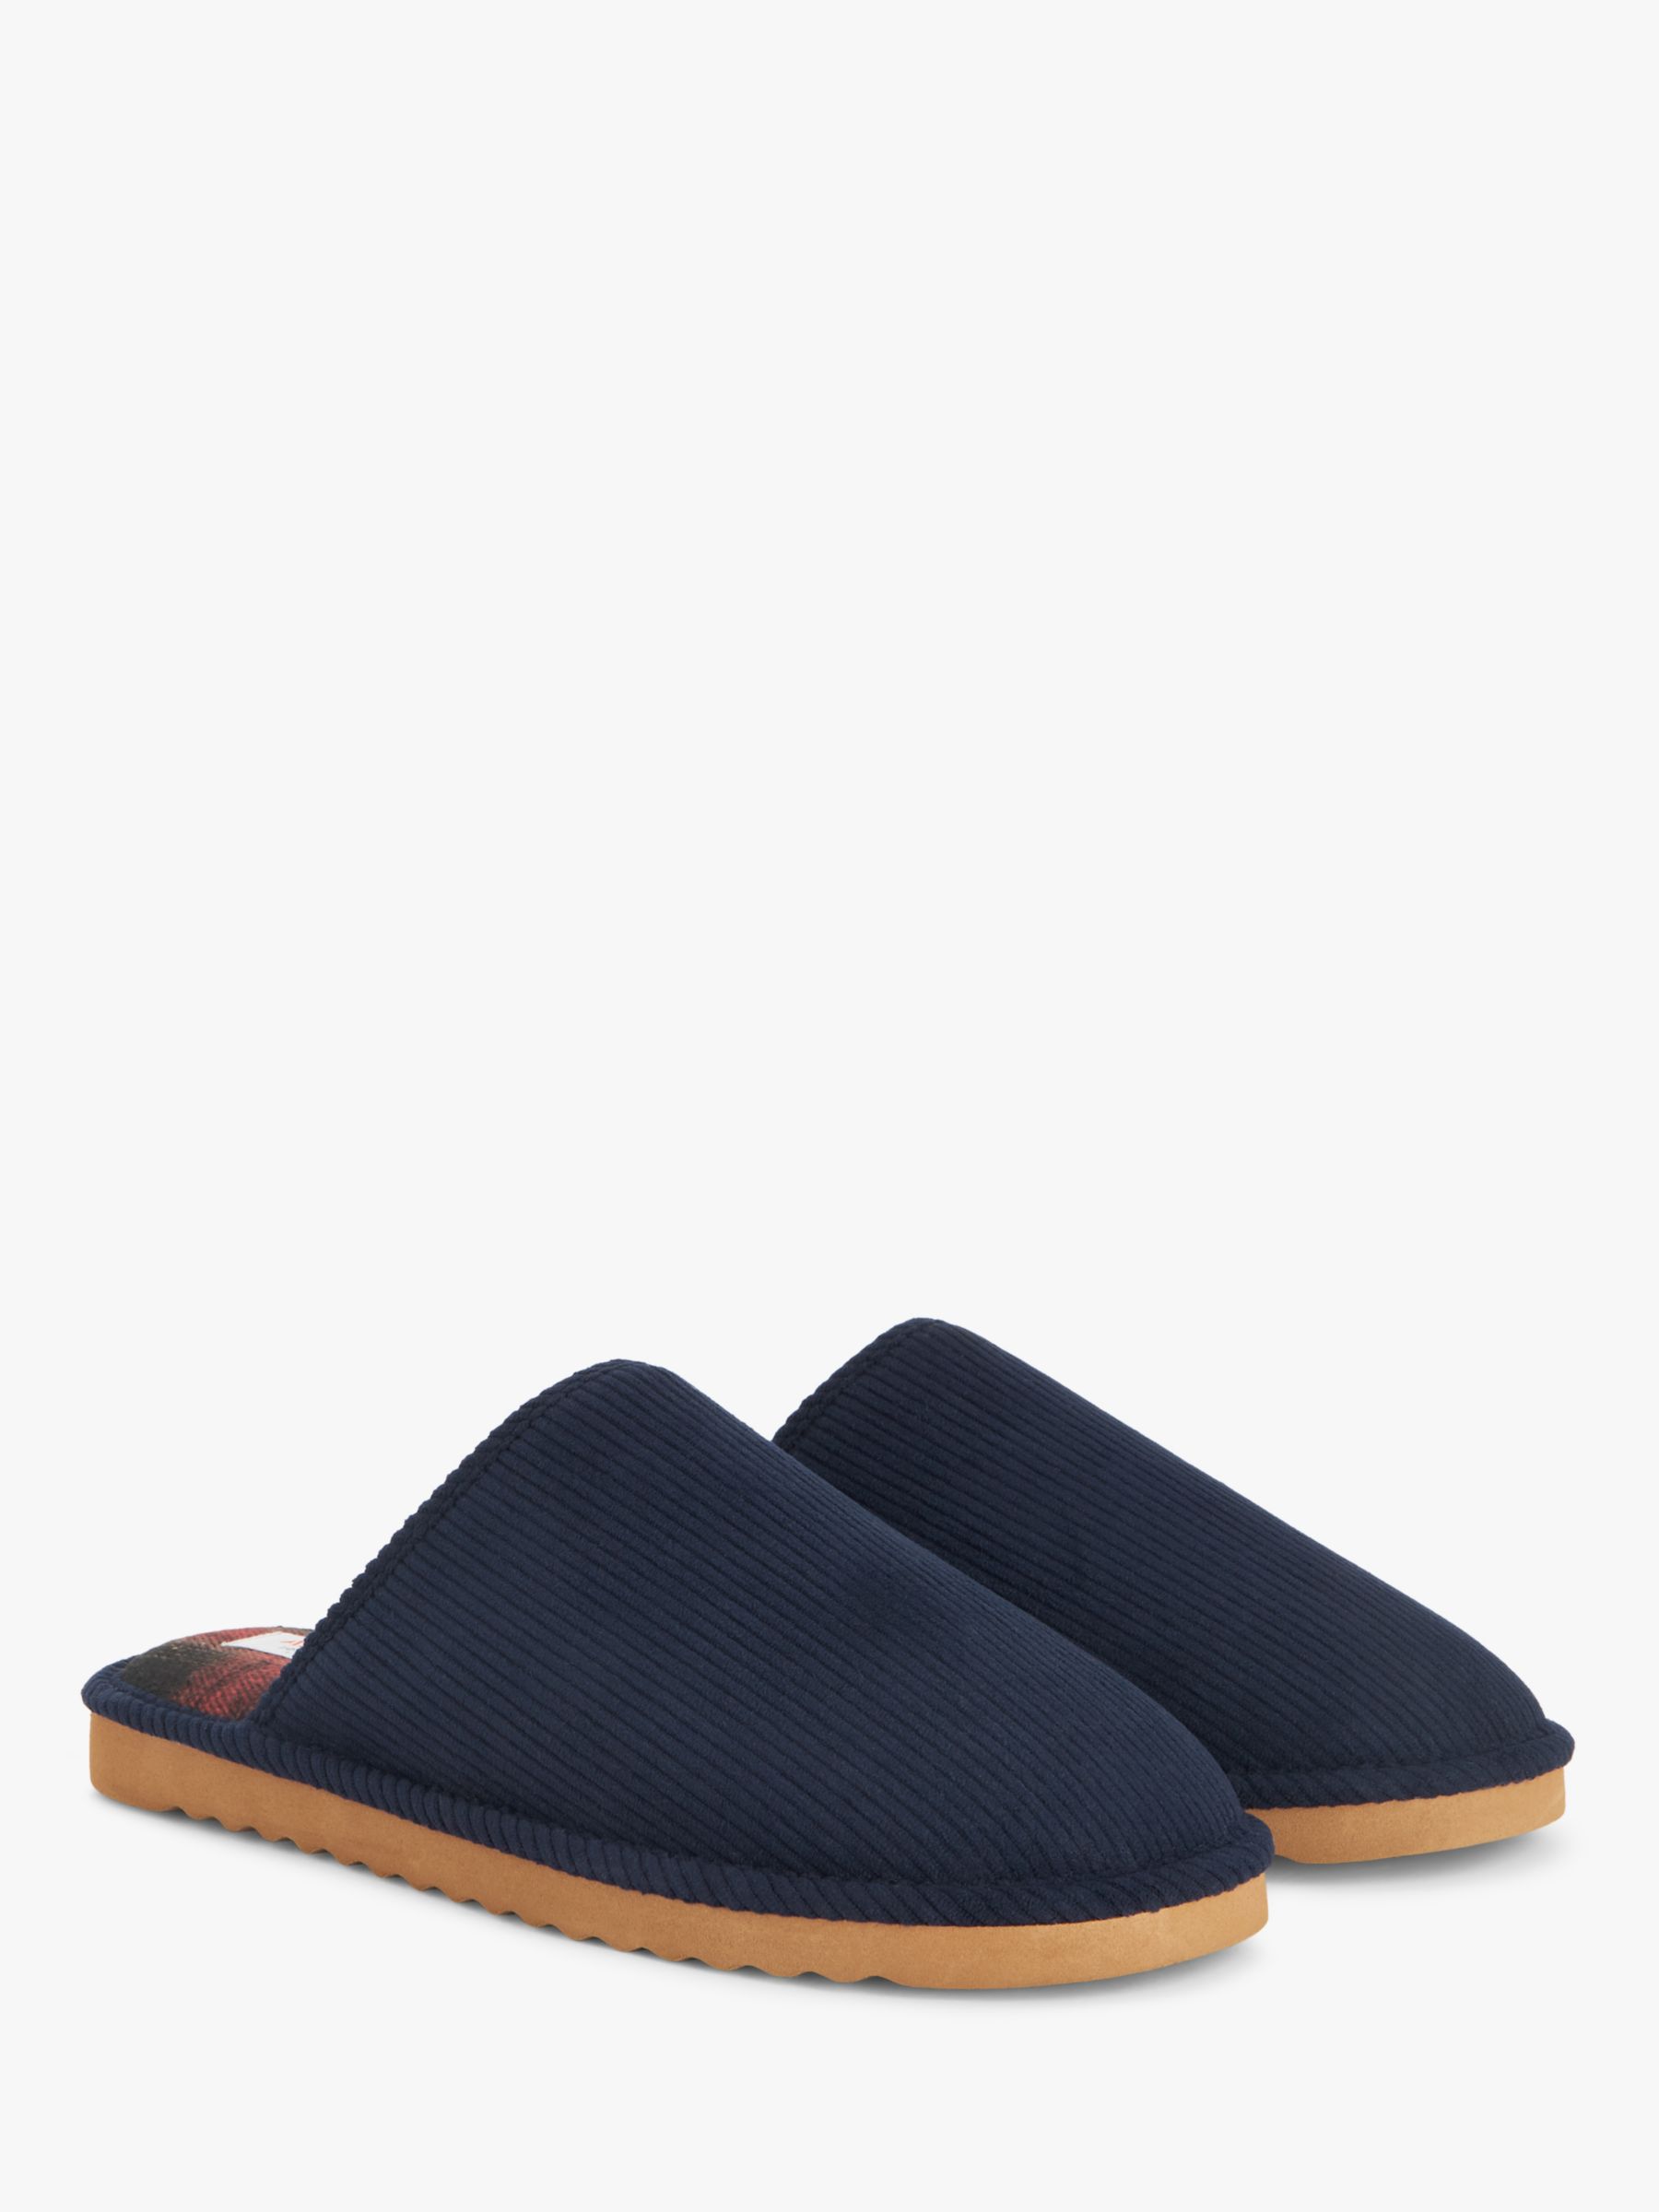 John Lewis ANYDAY Cord Wedge Mule Slippers, Navy at John Lewis & Partners